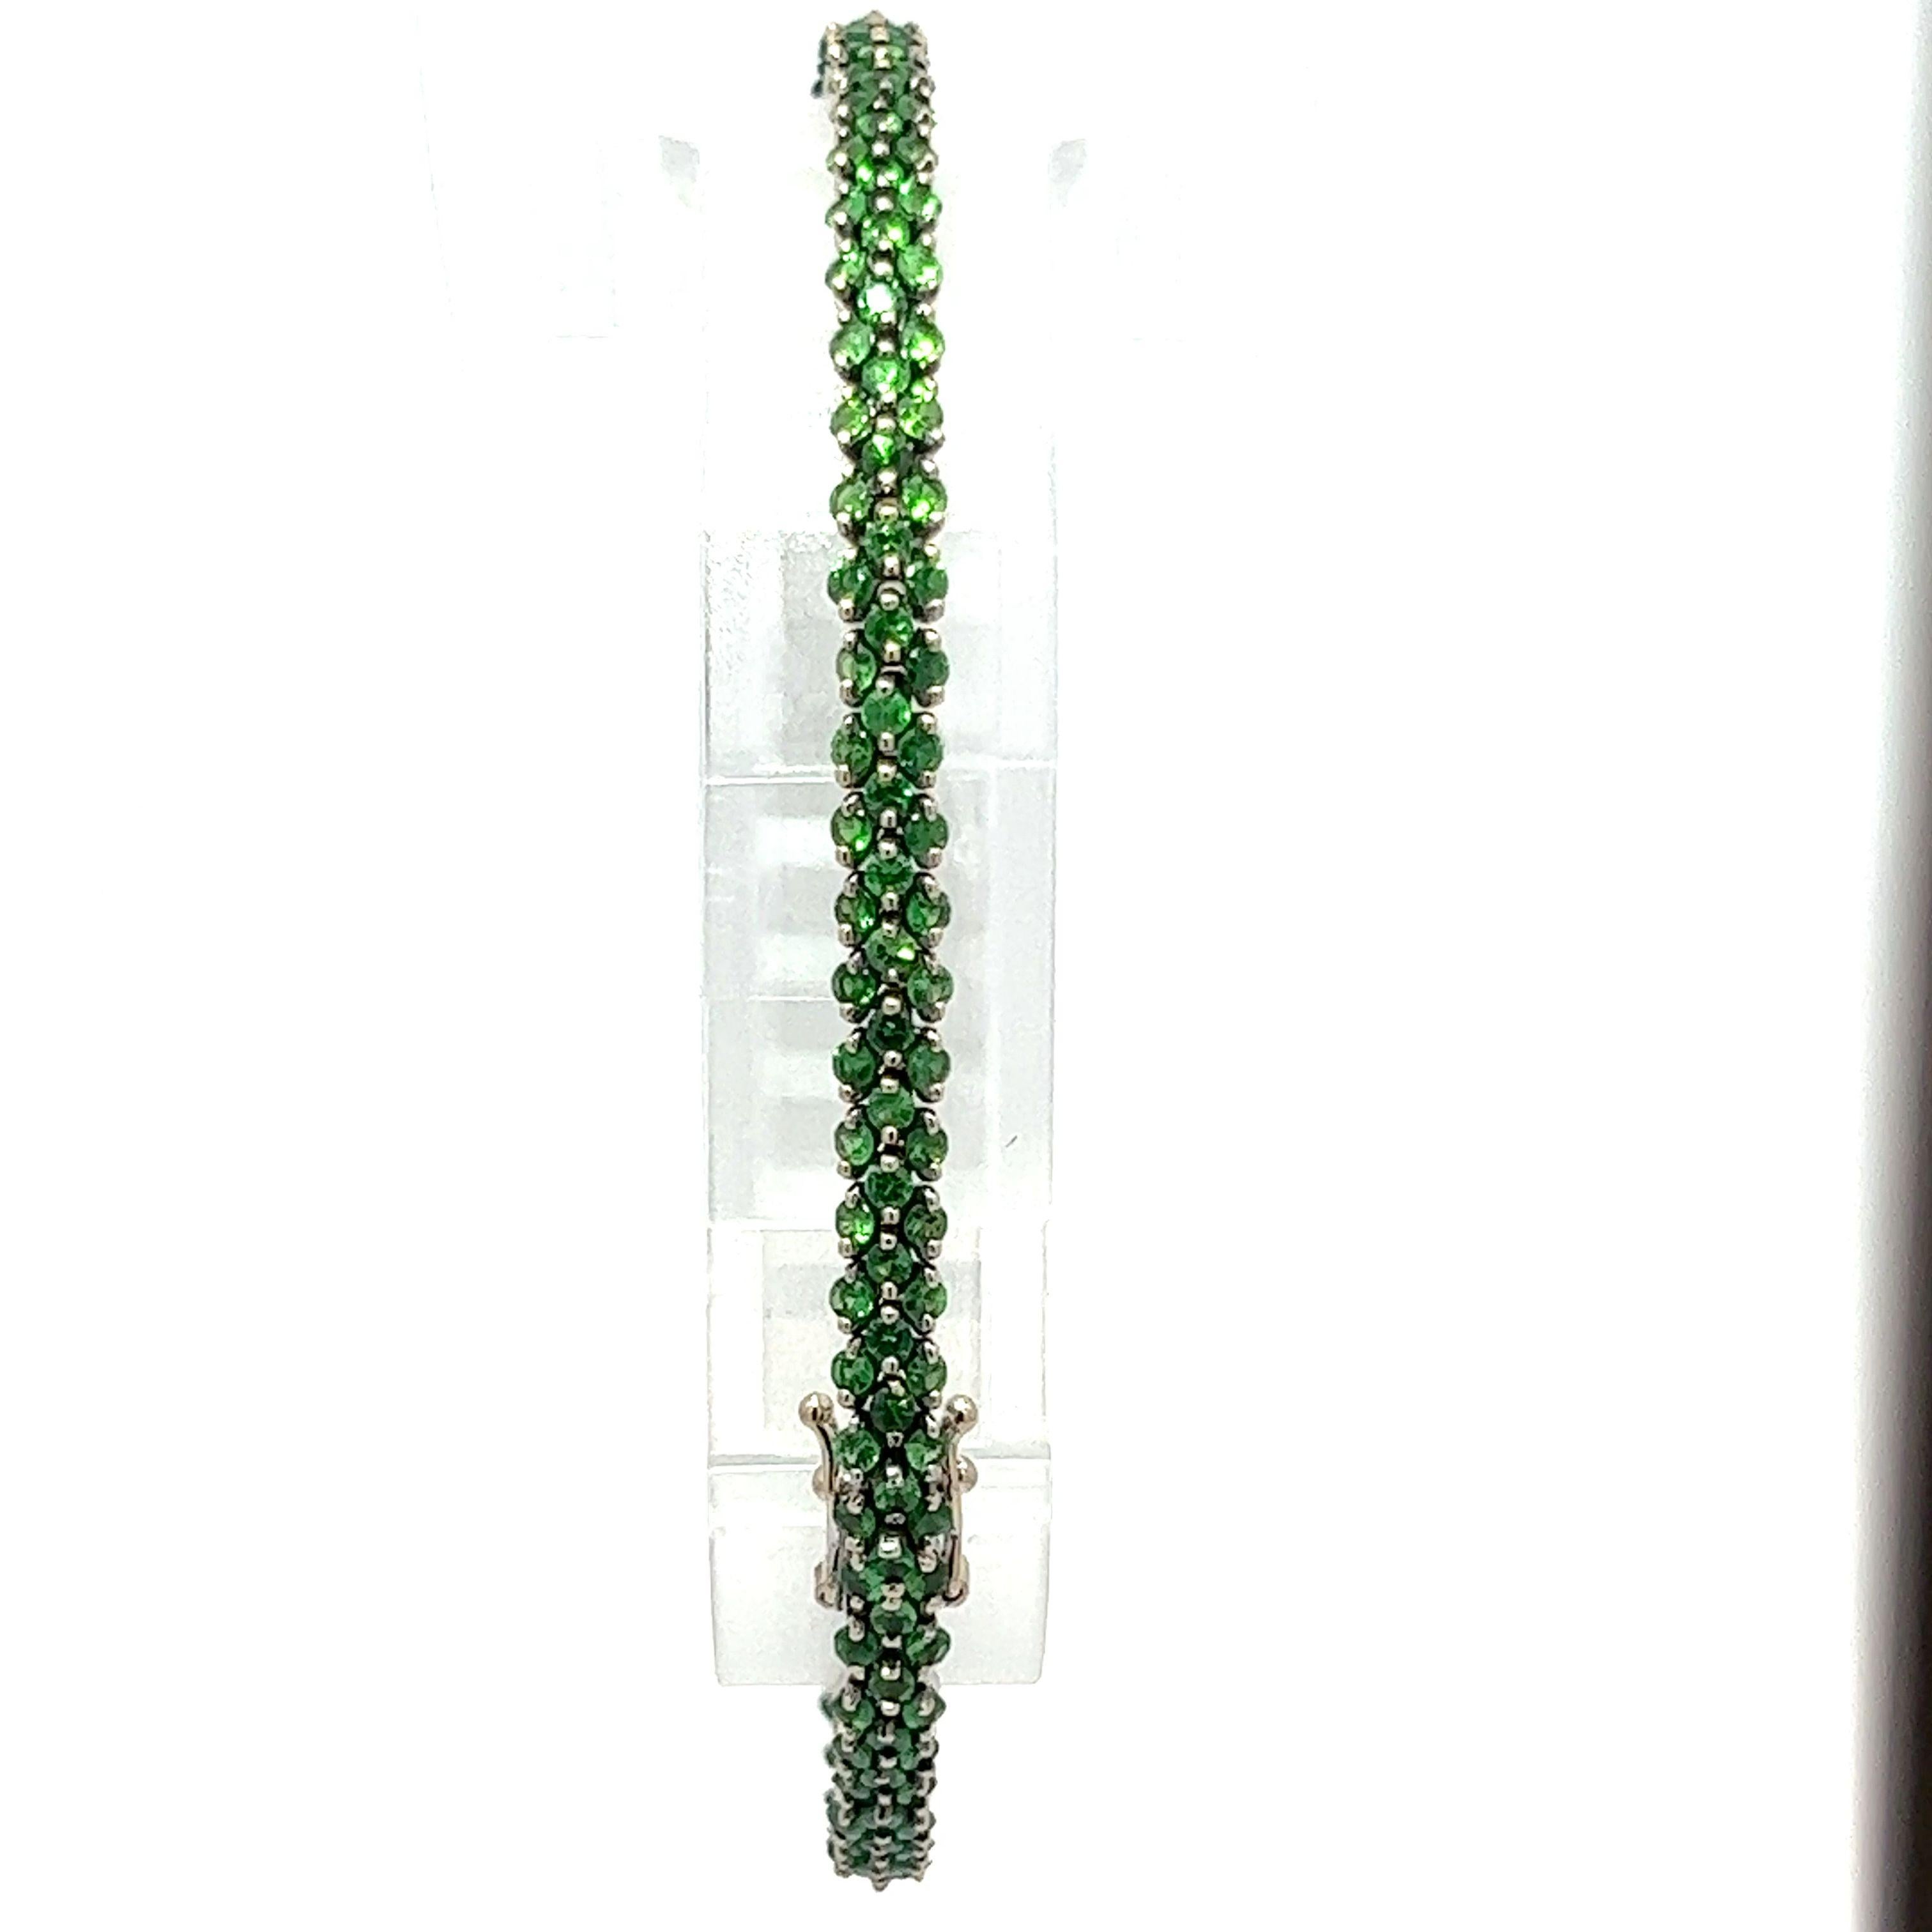 --Stone(s):--
200 Natural Genuine Tsavorite (approx.)- Round Brilliant Cut - Prong Set -  Vivid Green Color - 4 to 5ctw (approx.)

Material: Solid 18k White Gold w/ Black Rhodium
Weight: 12.19 Grams
Type: Tennis Line Link
Length: Will comfortably